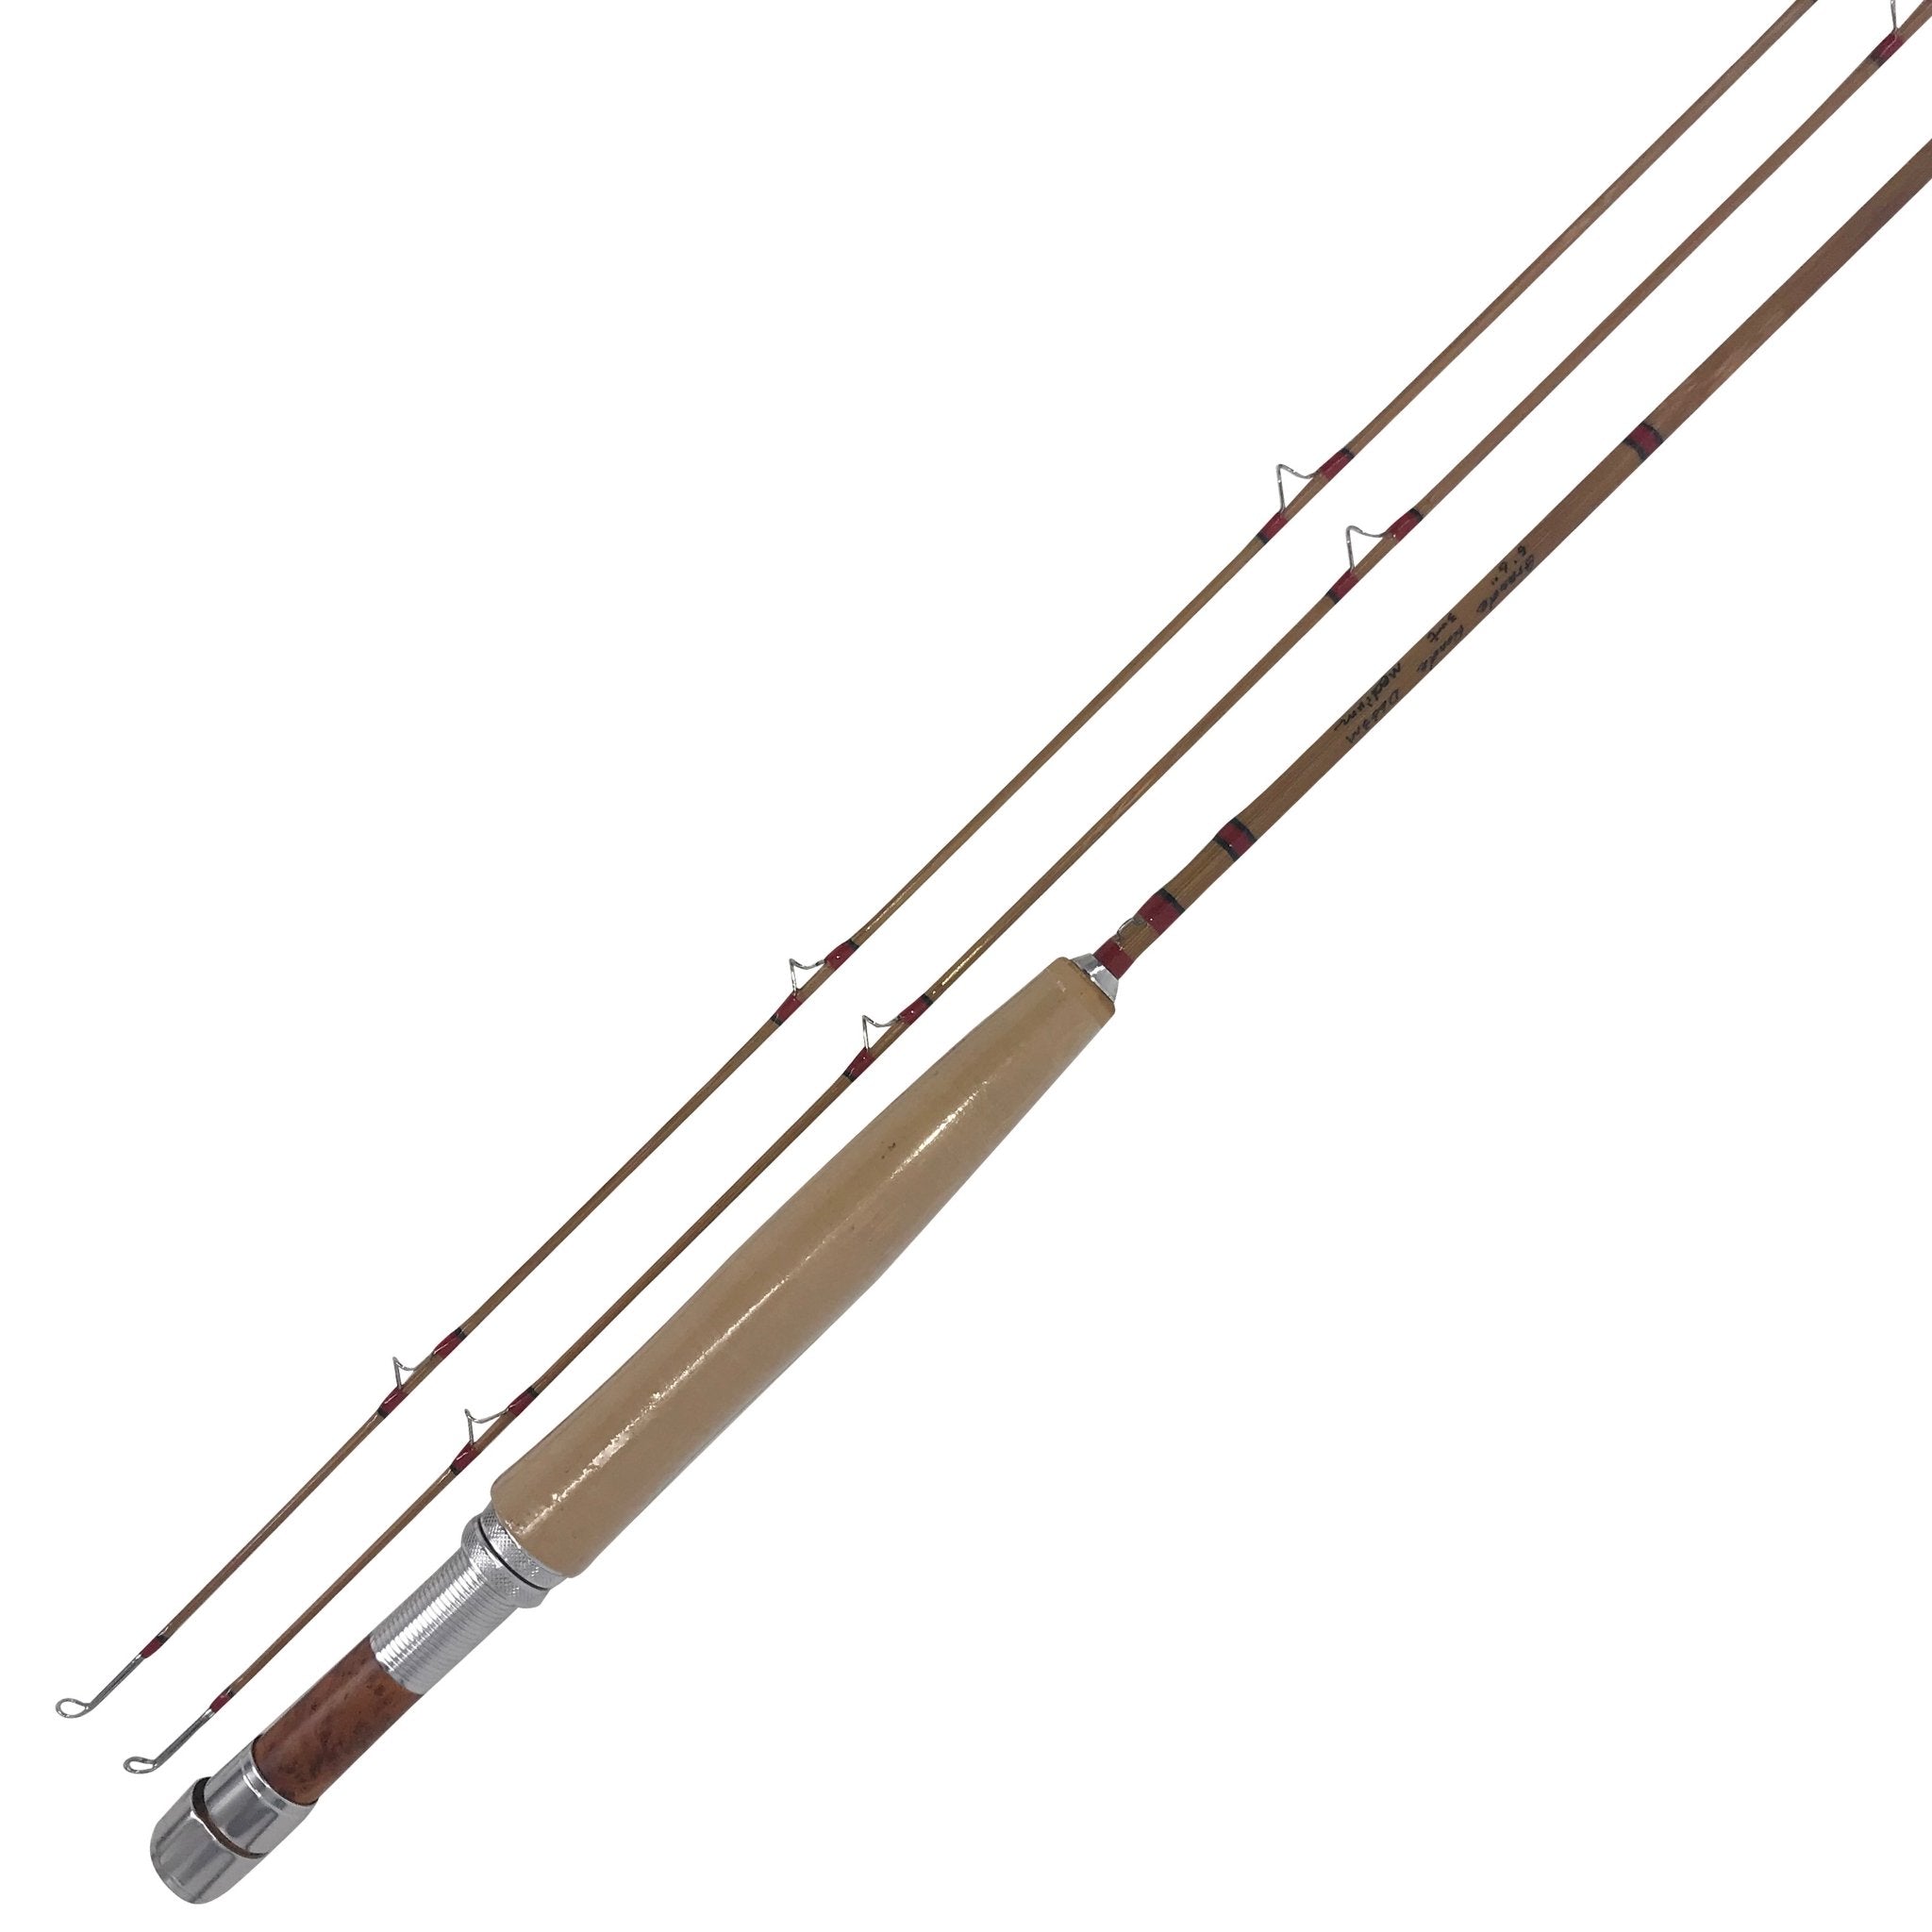 unique Wild bamboo Fly rods 9'3~9 wt 3-piece 1-tip ( fast action）